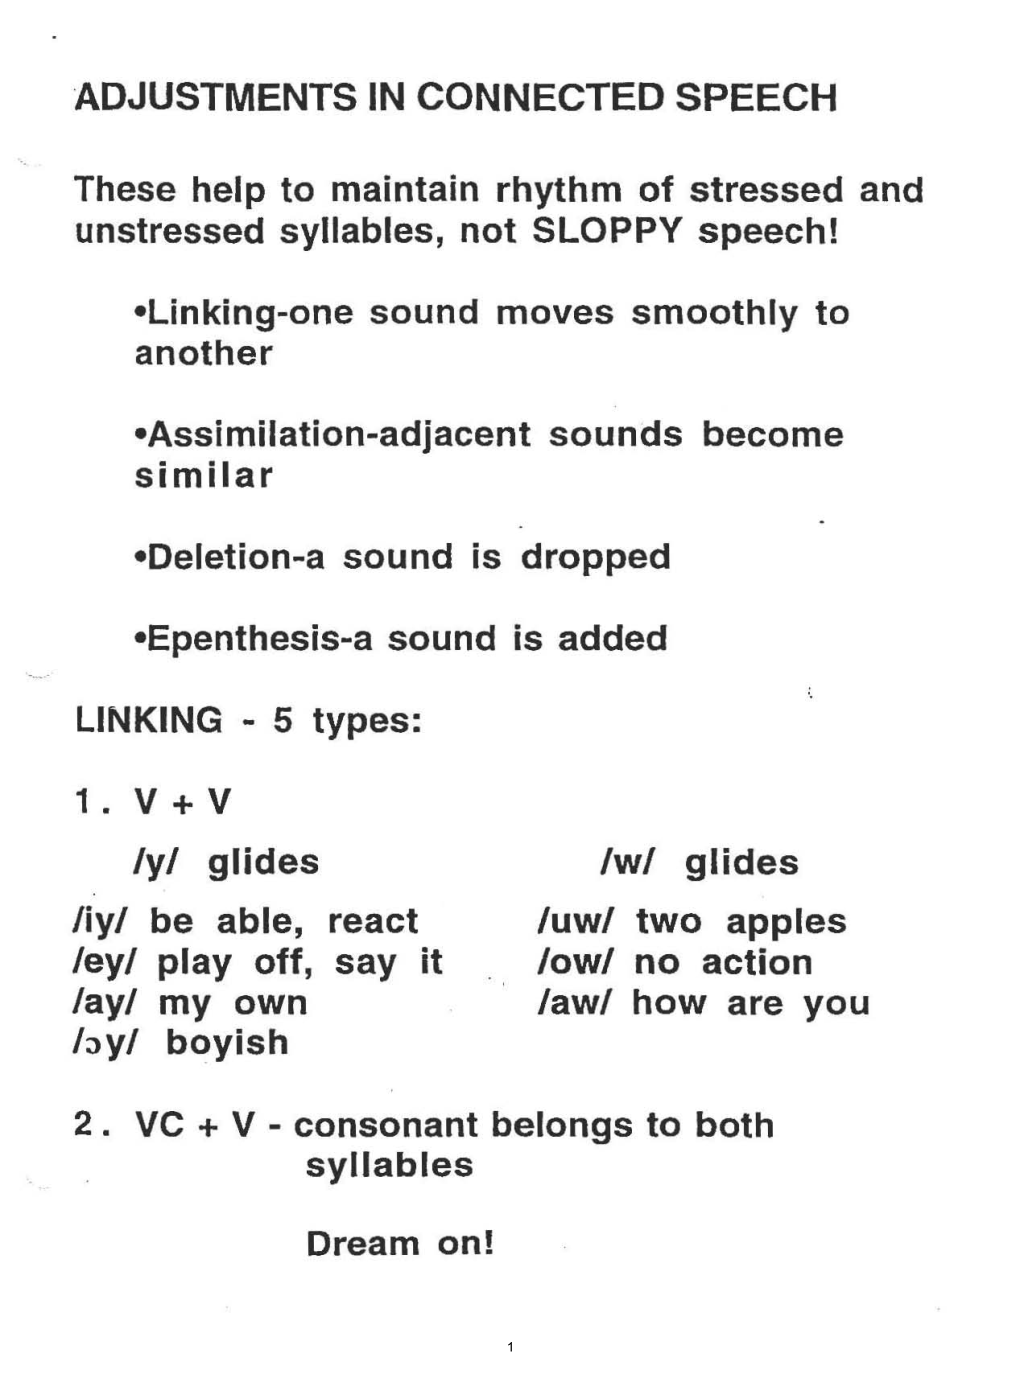 Adjustments in Connected Speech